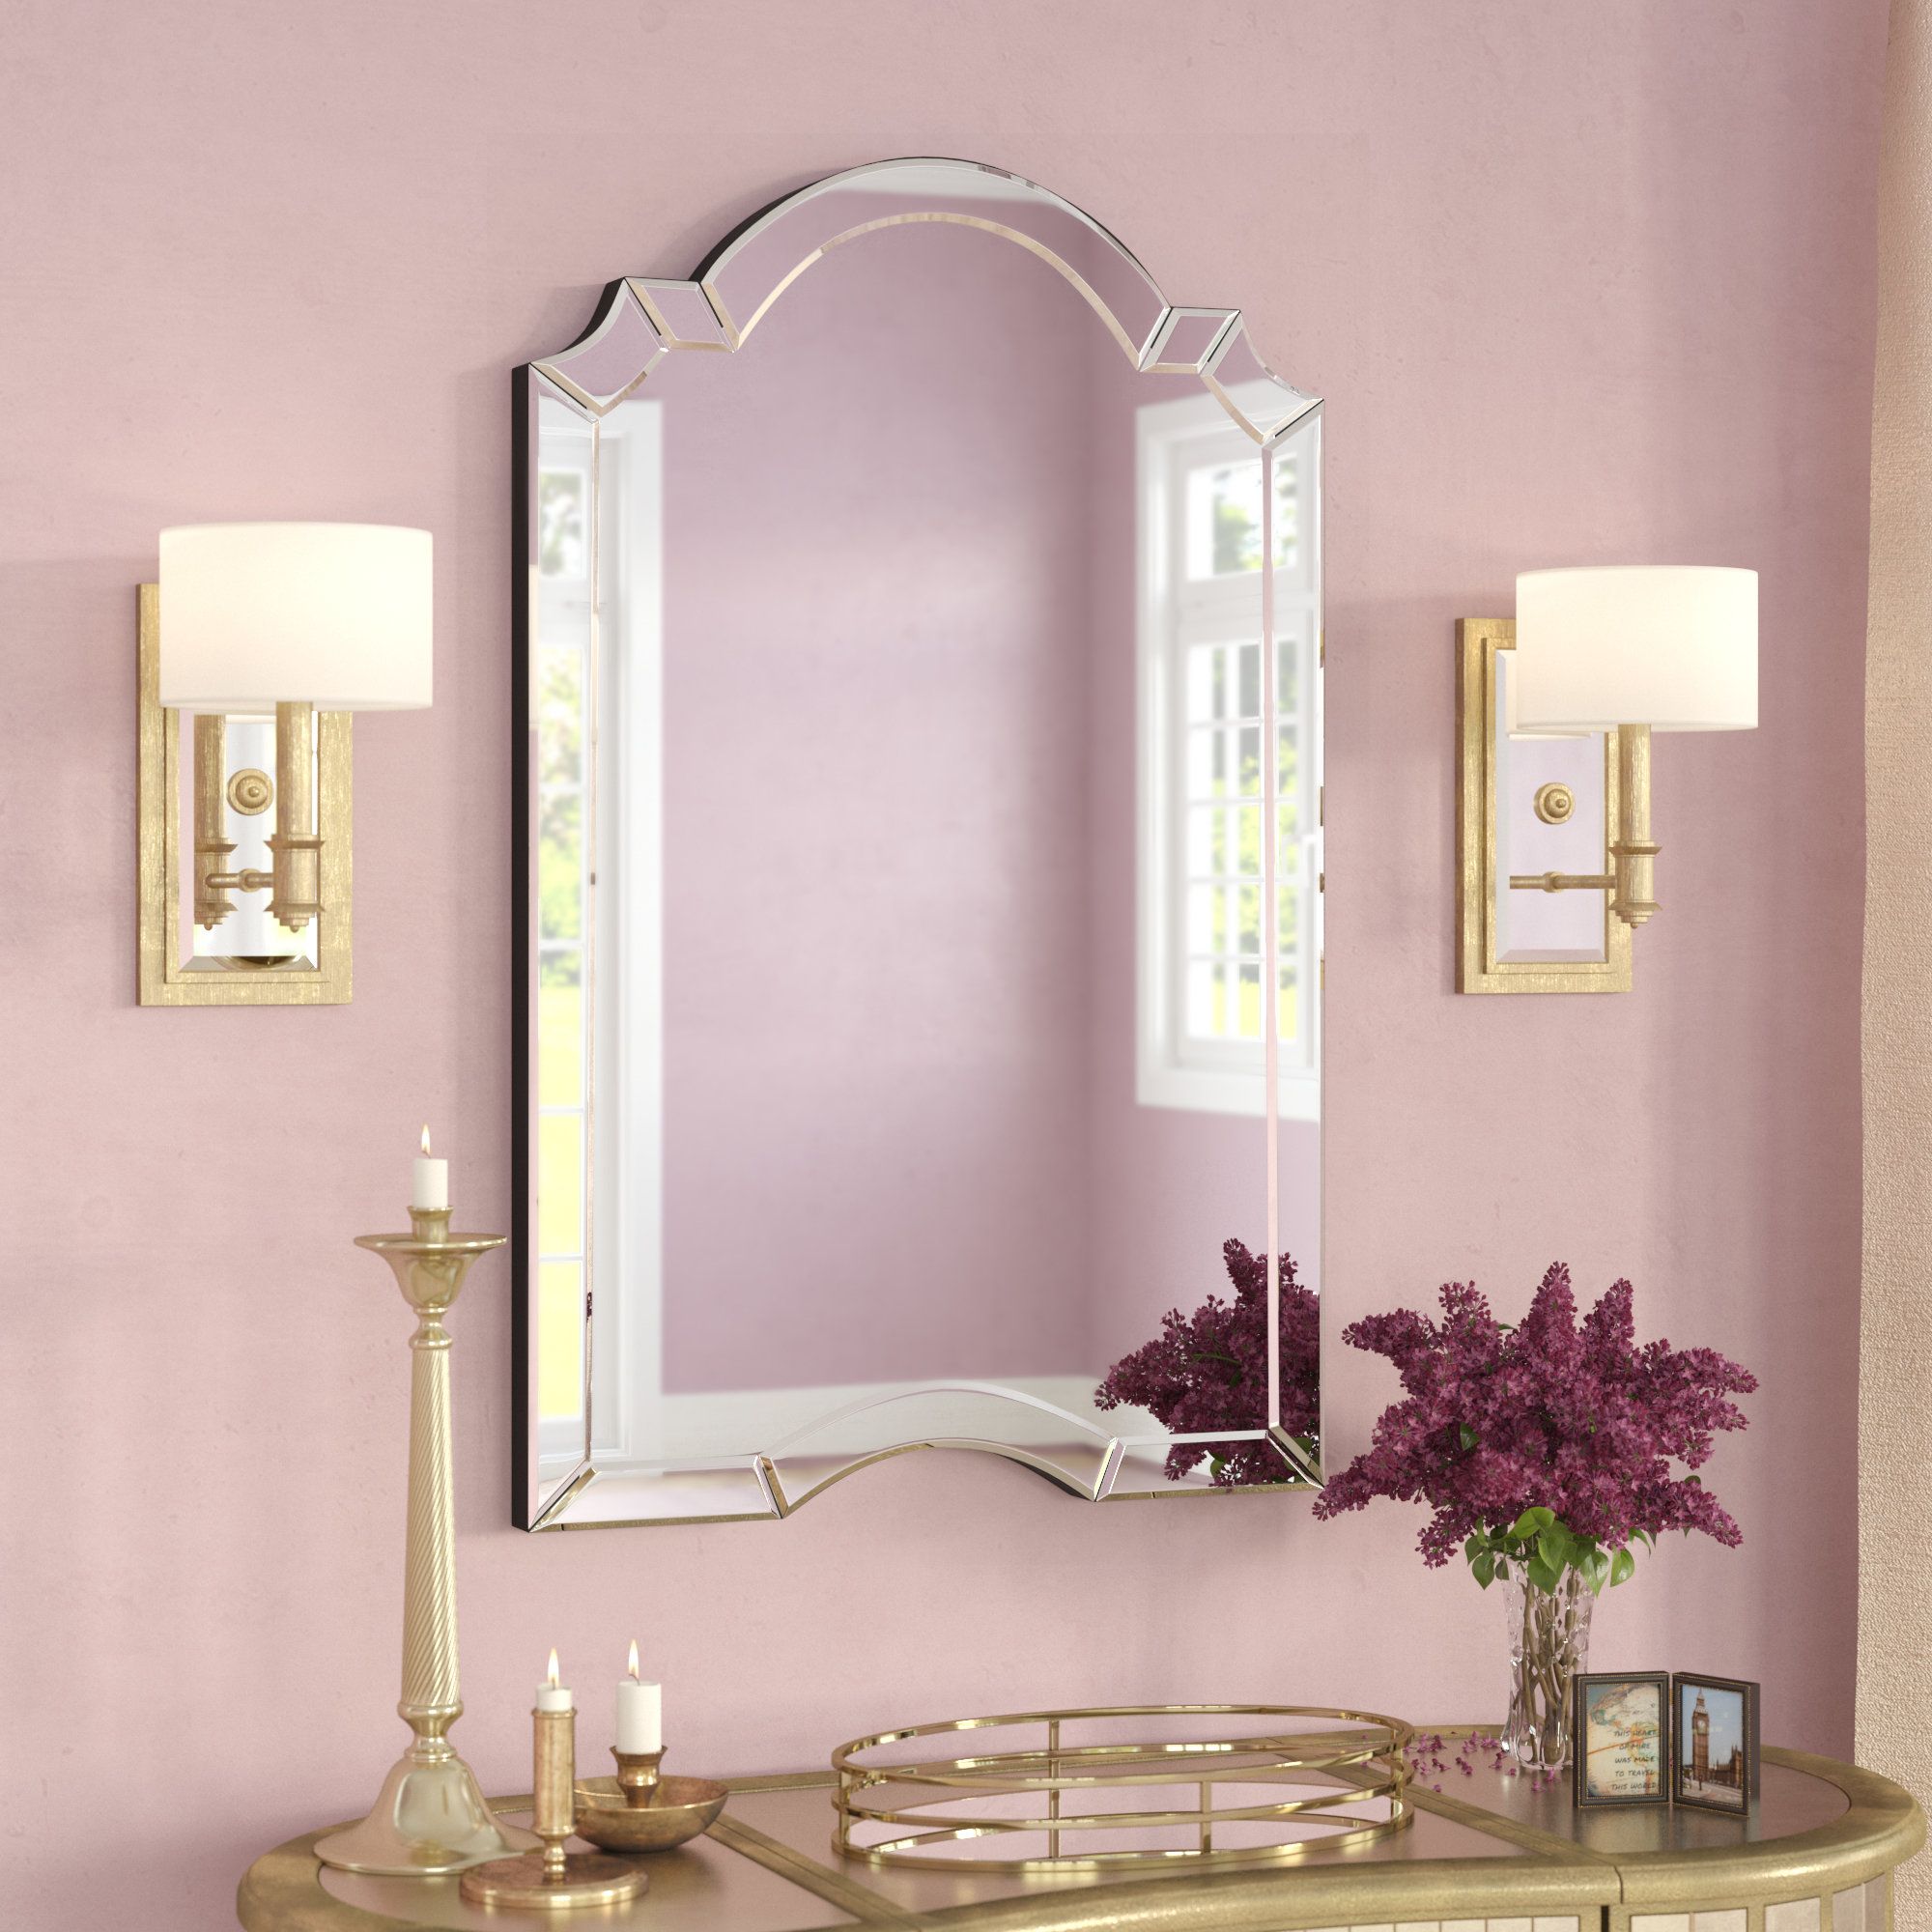 Willa Arlo Interiors Ekaterina Arch/crowned Top Wall Mirror Throughout Ekaterina Arch/crowned Top Wall Mirrors (View 1 of 30)